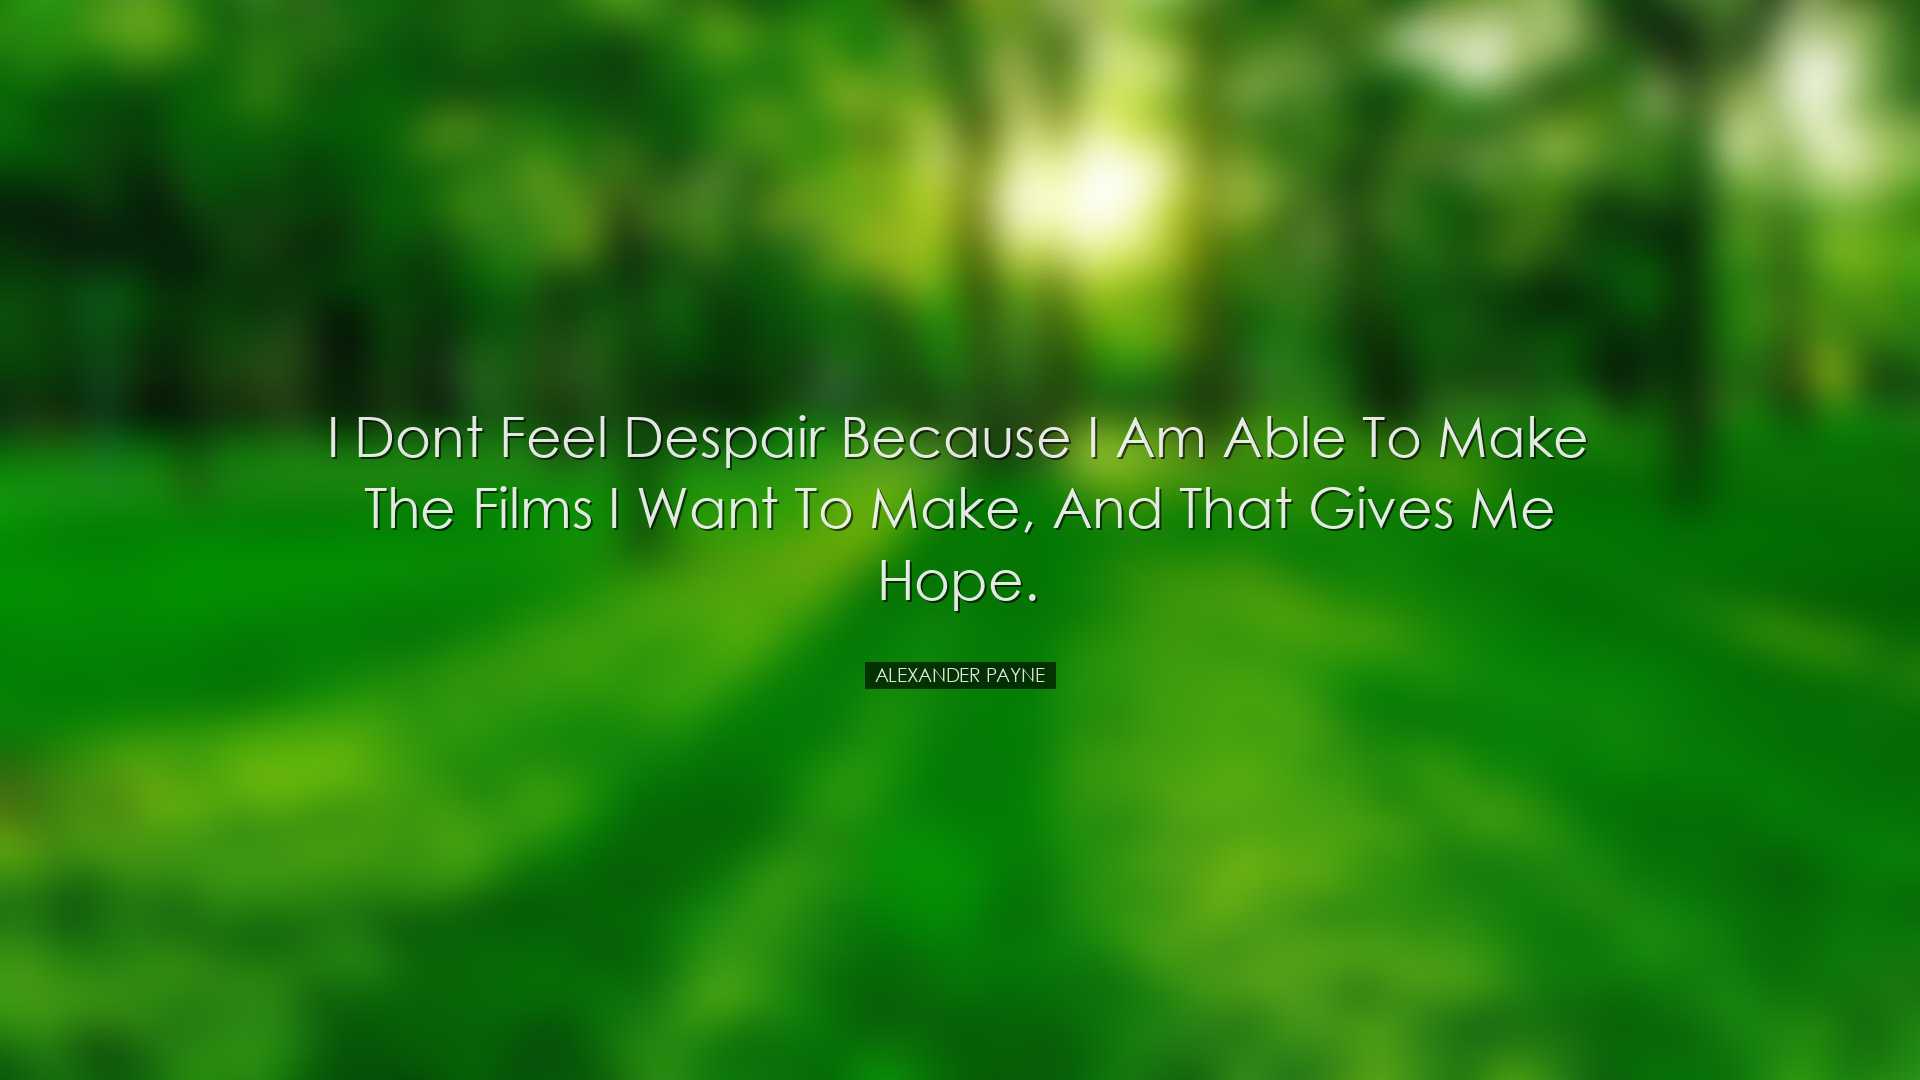 I dont feel despair because I am able to make the films I want to